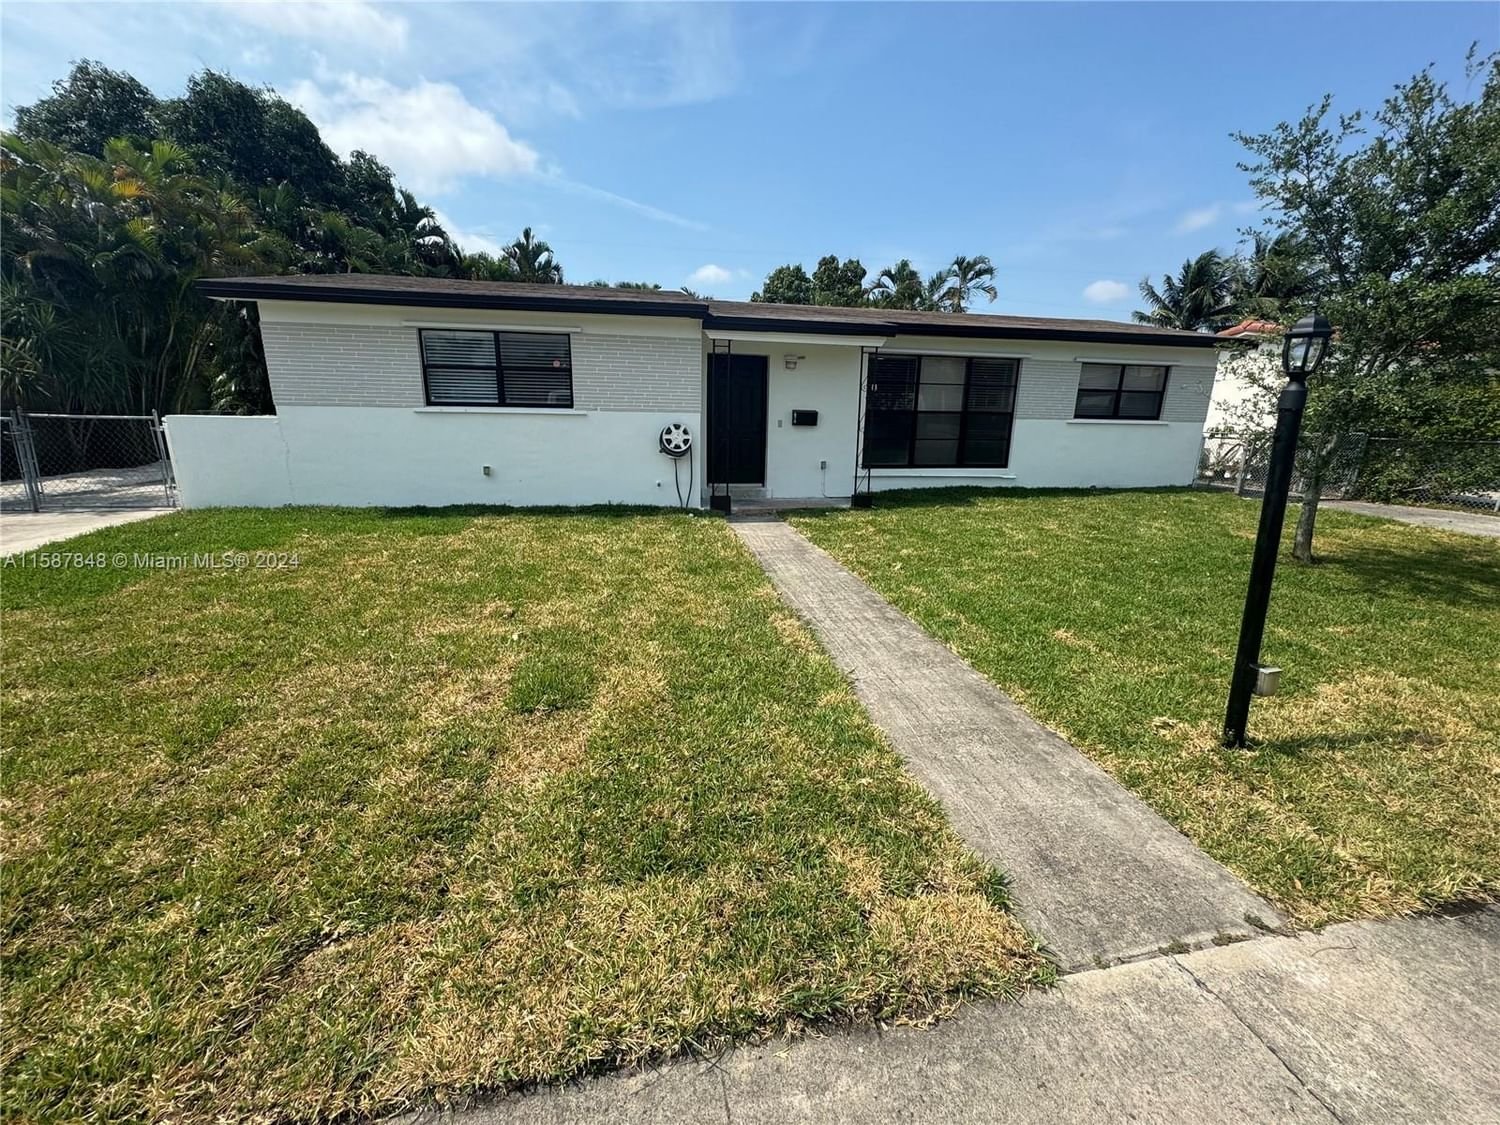 Real estate property located at 874 72nd Pl, Miami-Dade County, MEADOWS PARK, Hialeah, FL